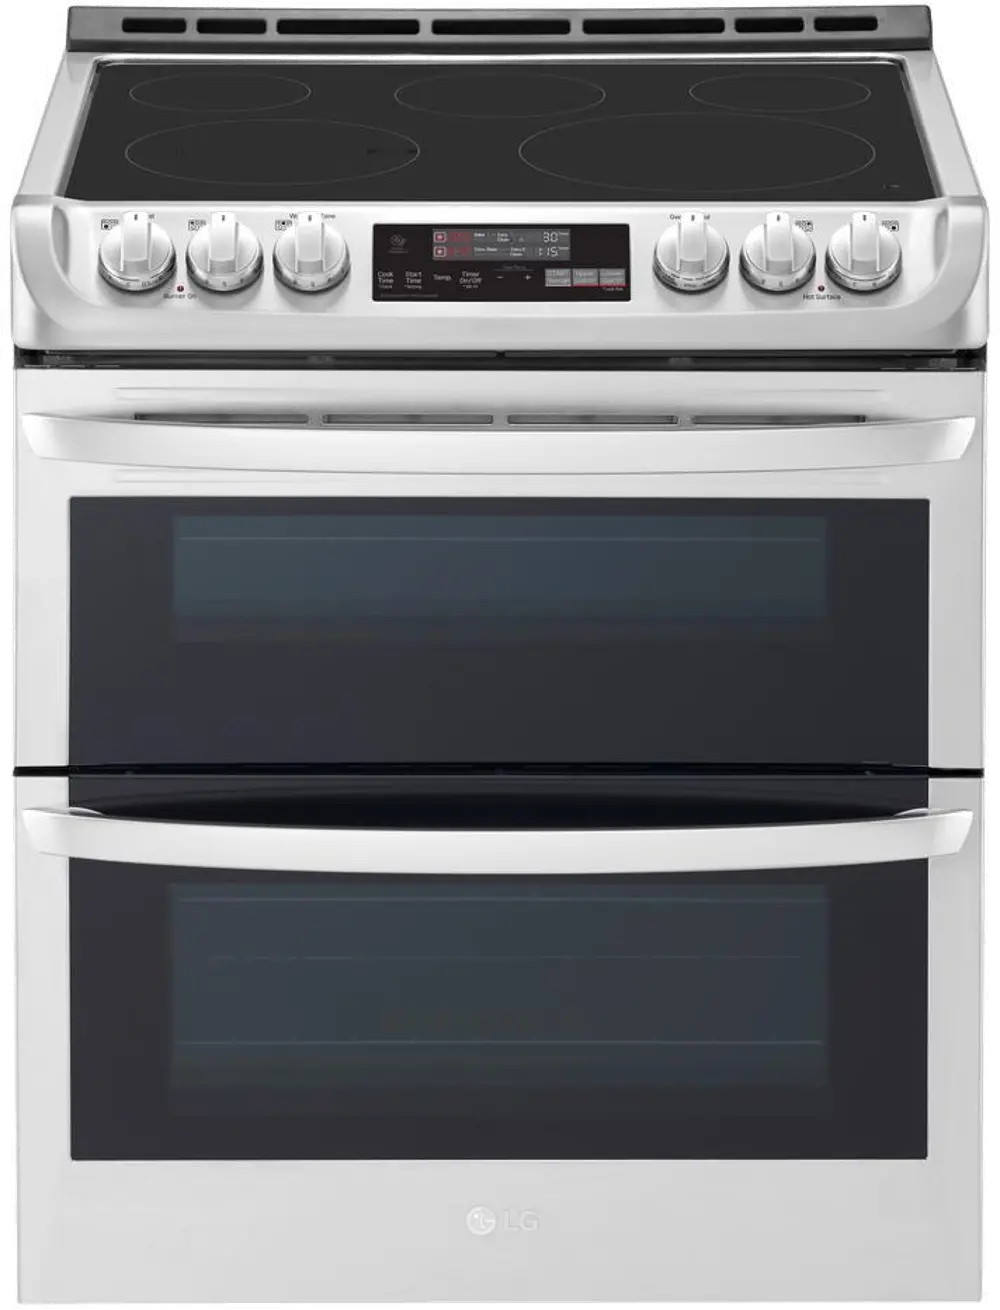 LTE4815ST LG 7.3 cu ft Double Oven Electric Range - Stainless Steel-1